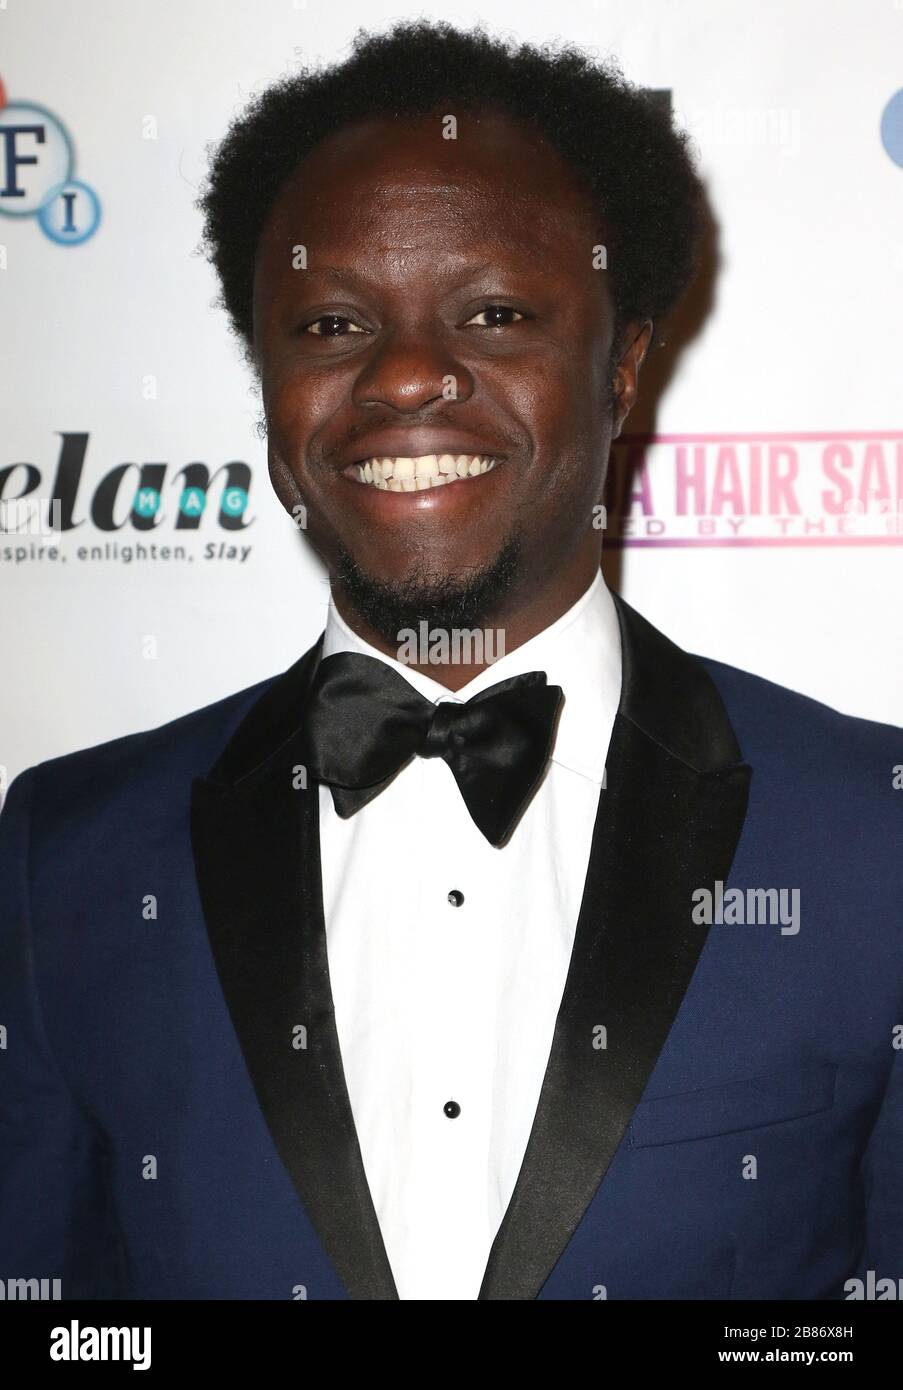 May 07, 2017 - London, England, UK - Screen Nation Film & Television Awards 2017, Park Plaza Riverbank - Red Carpet Arrivals Photo Shows: Guest Stock Photo